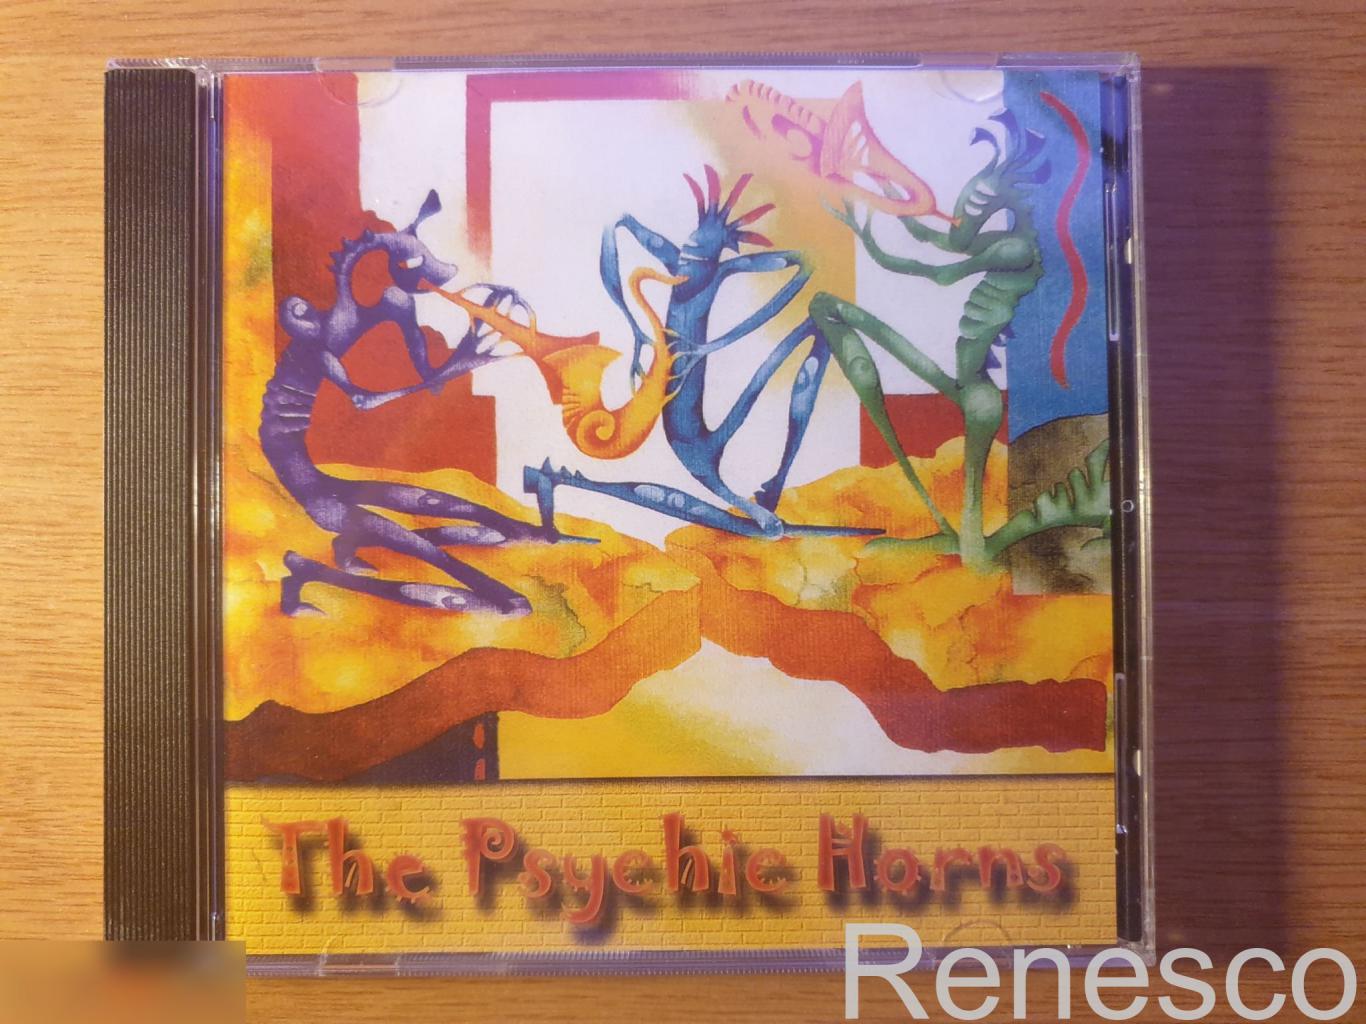 (CD) The Psychic Horns (USA) (2005)